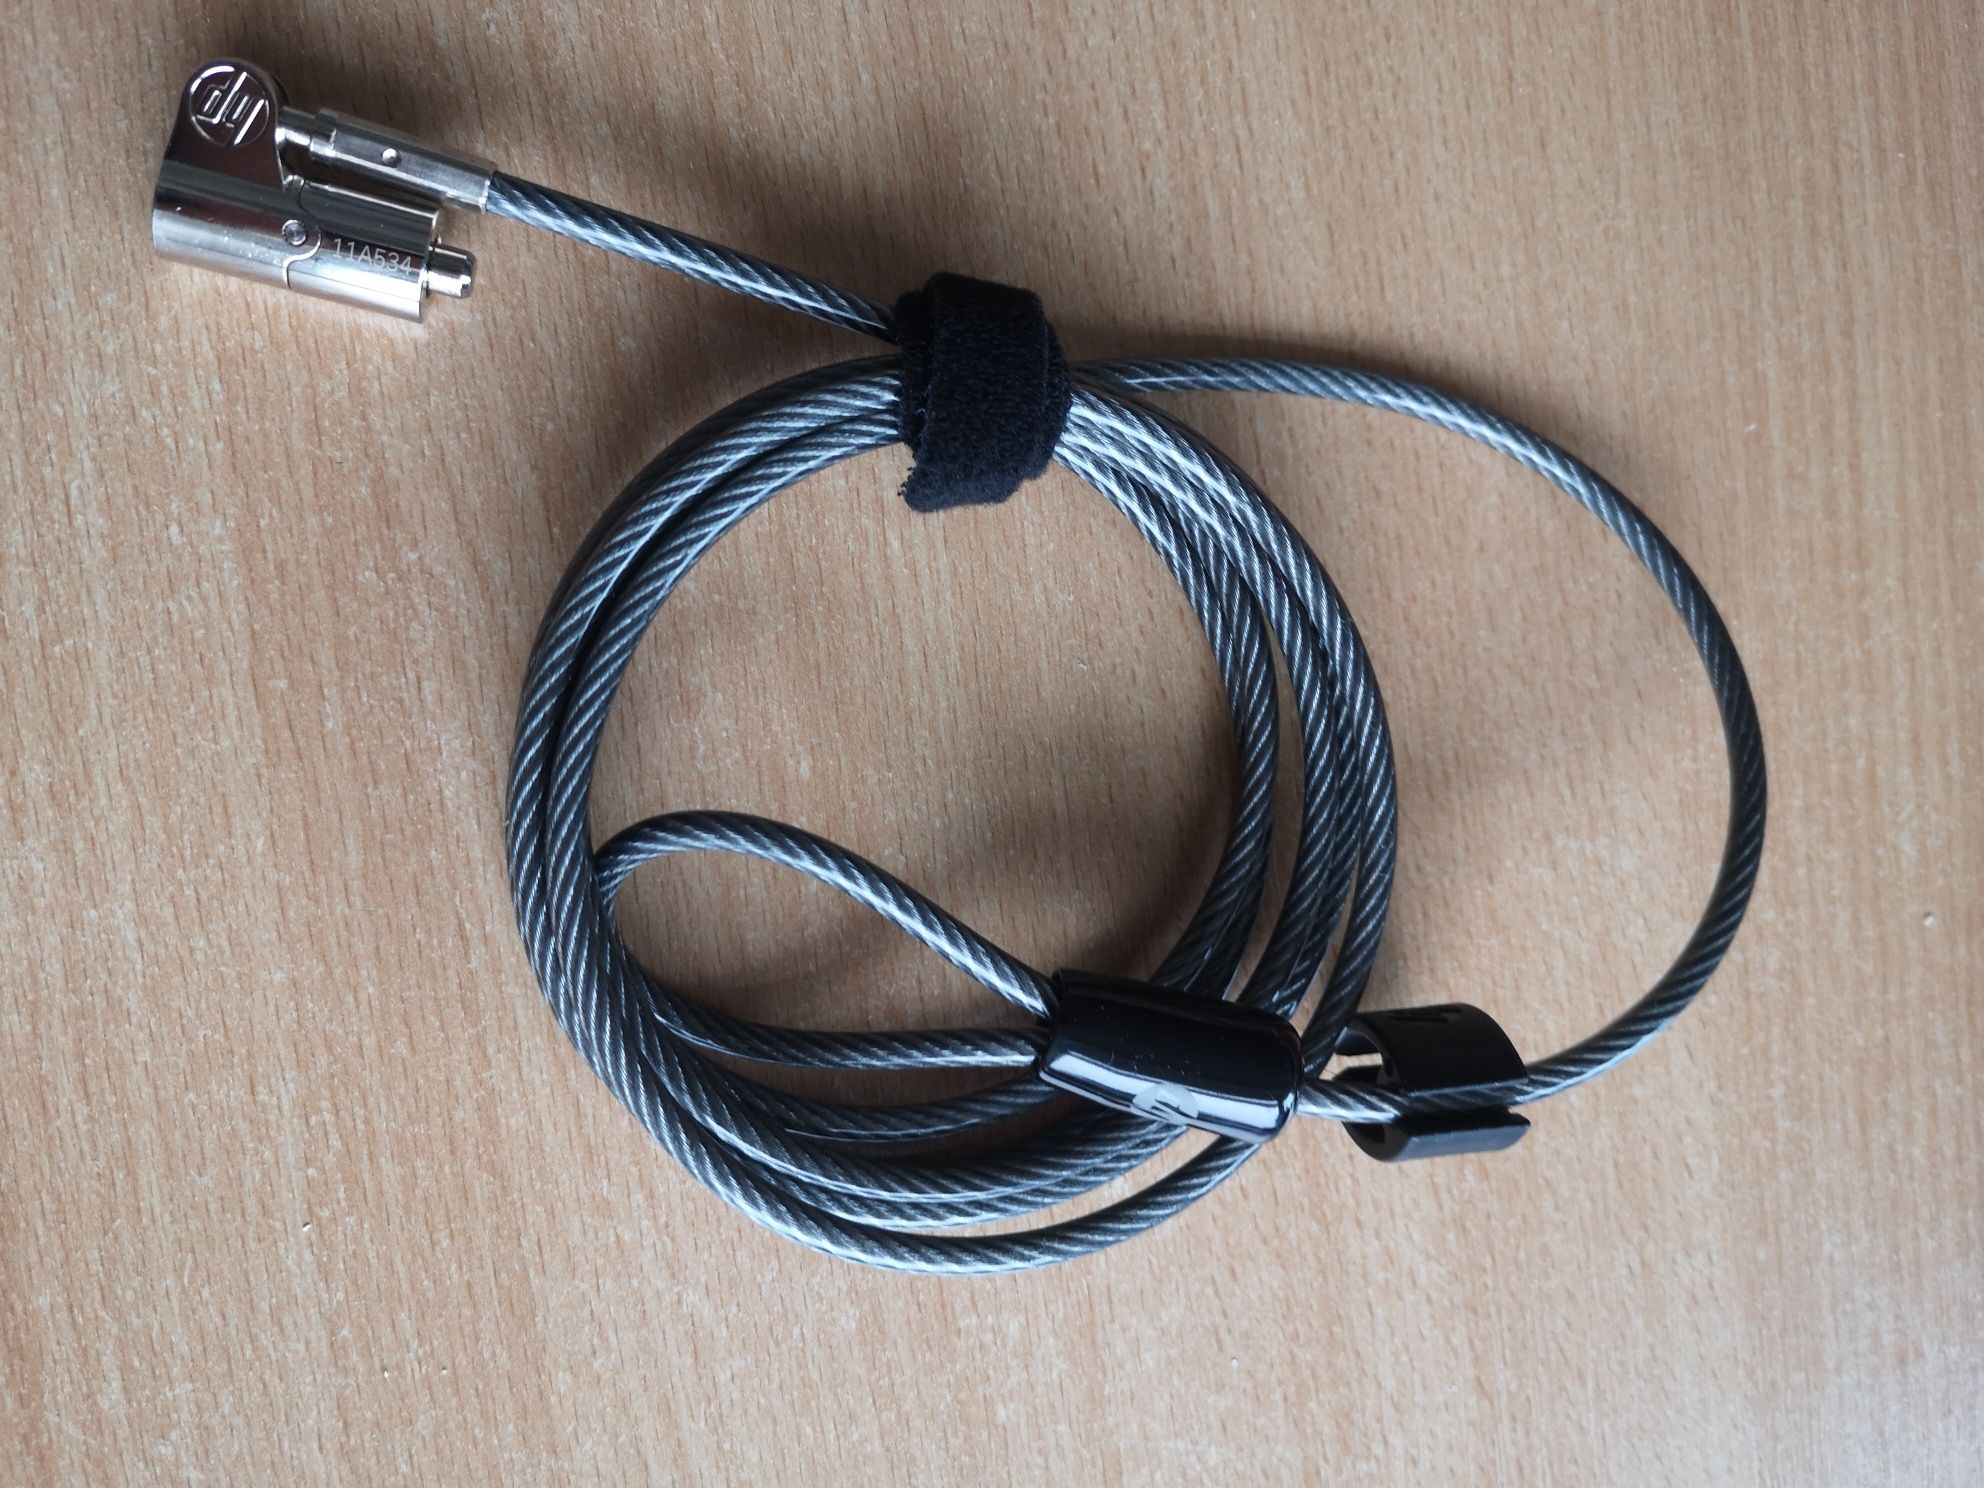 HP Sure Key Cable Lock